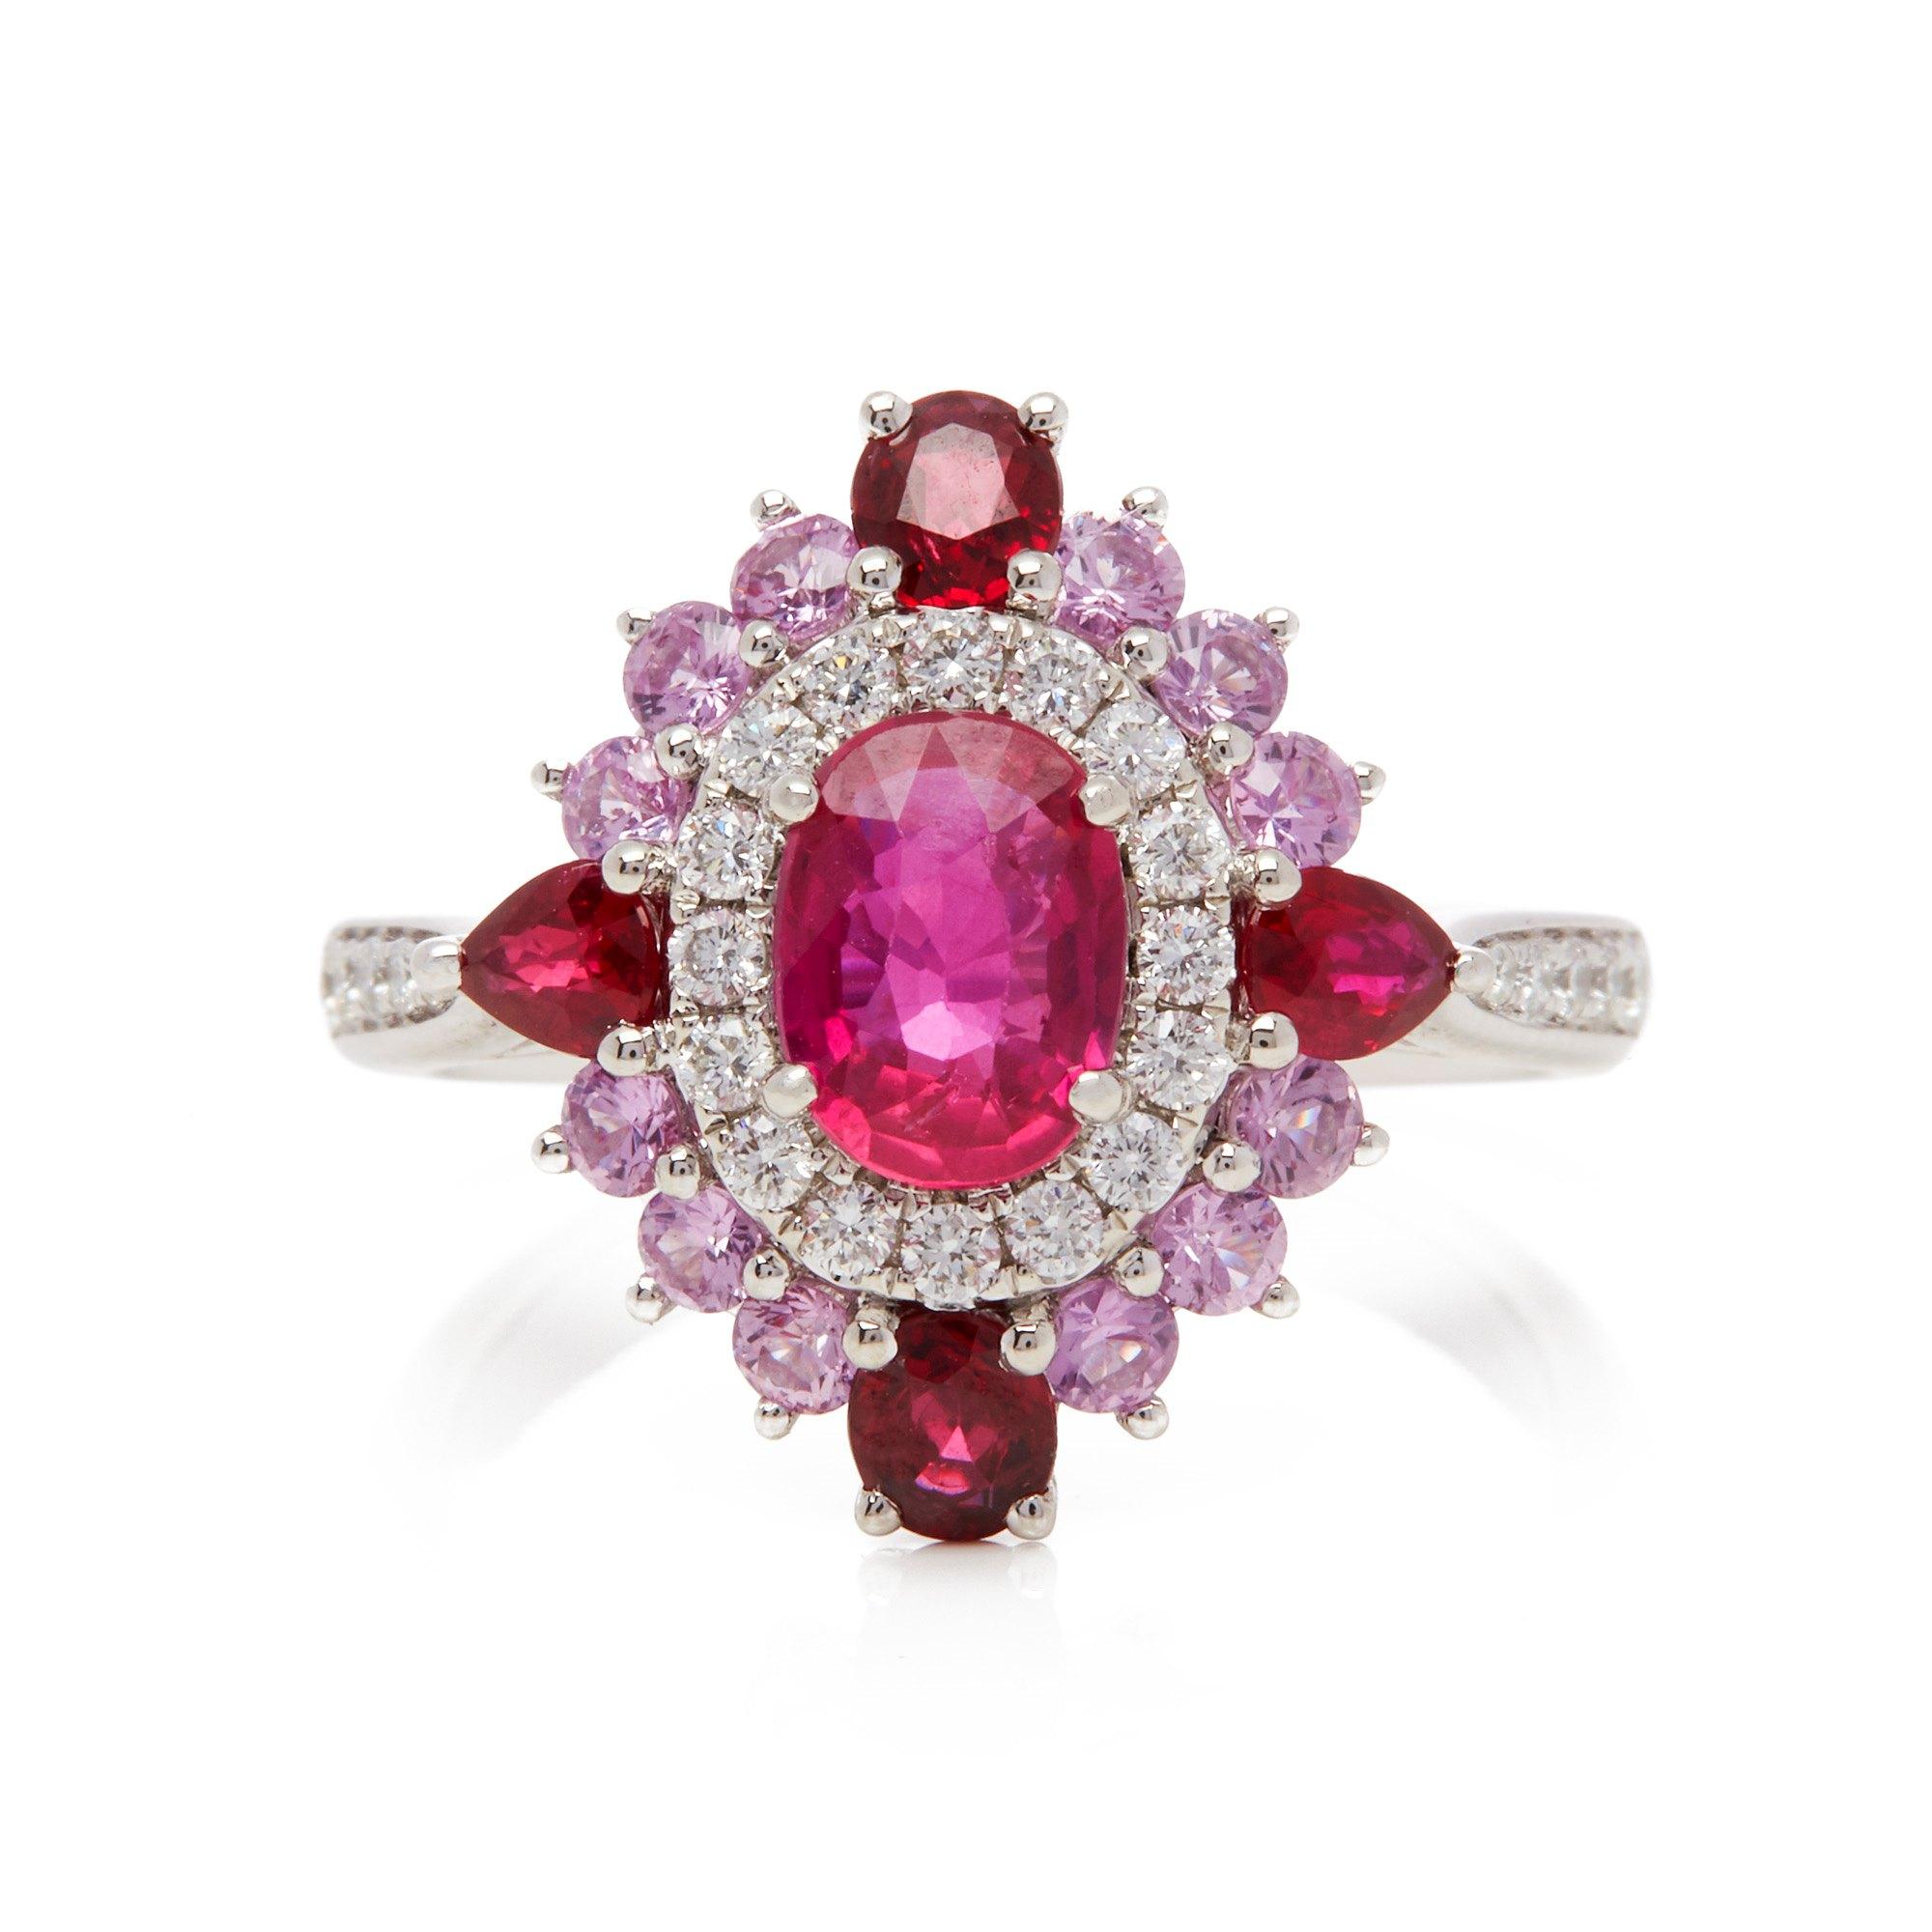 This ring designed by David Jerome is from his private collection and features one oval cut Ruby sourced in Mozambique totalling 1.11cts. Set with a mix of round brilliant cut Diamonds, Rubies and pink Sapphires totalling 1.85cts combined. Mounted